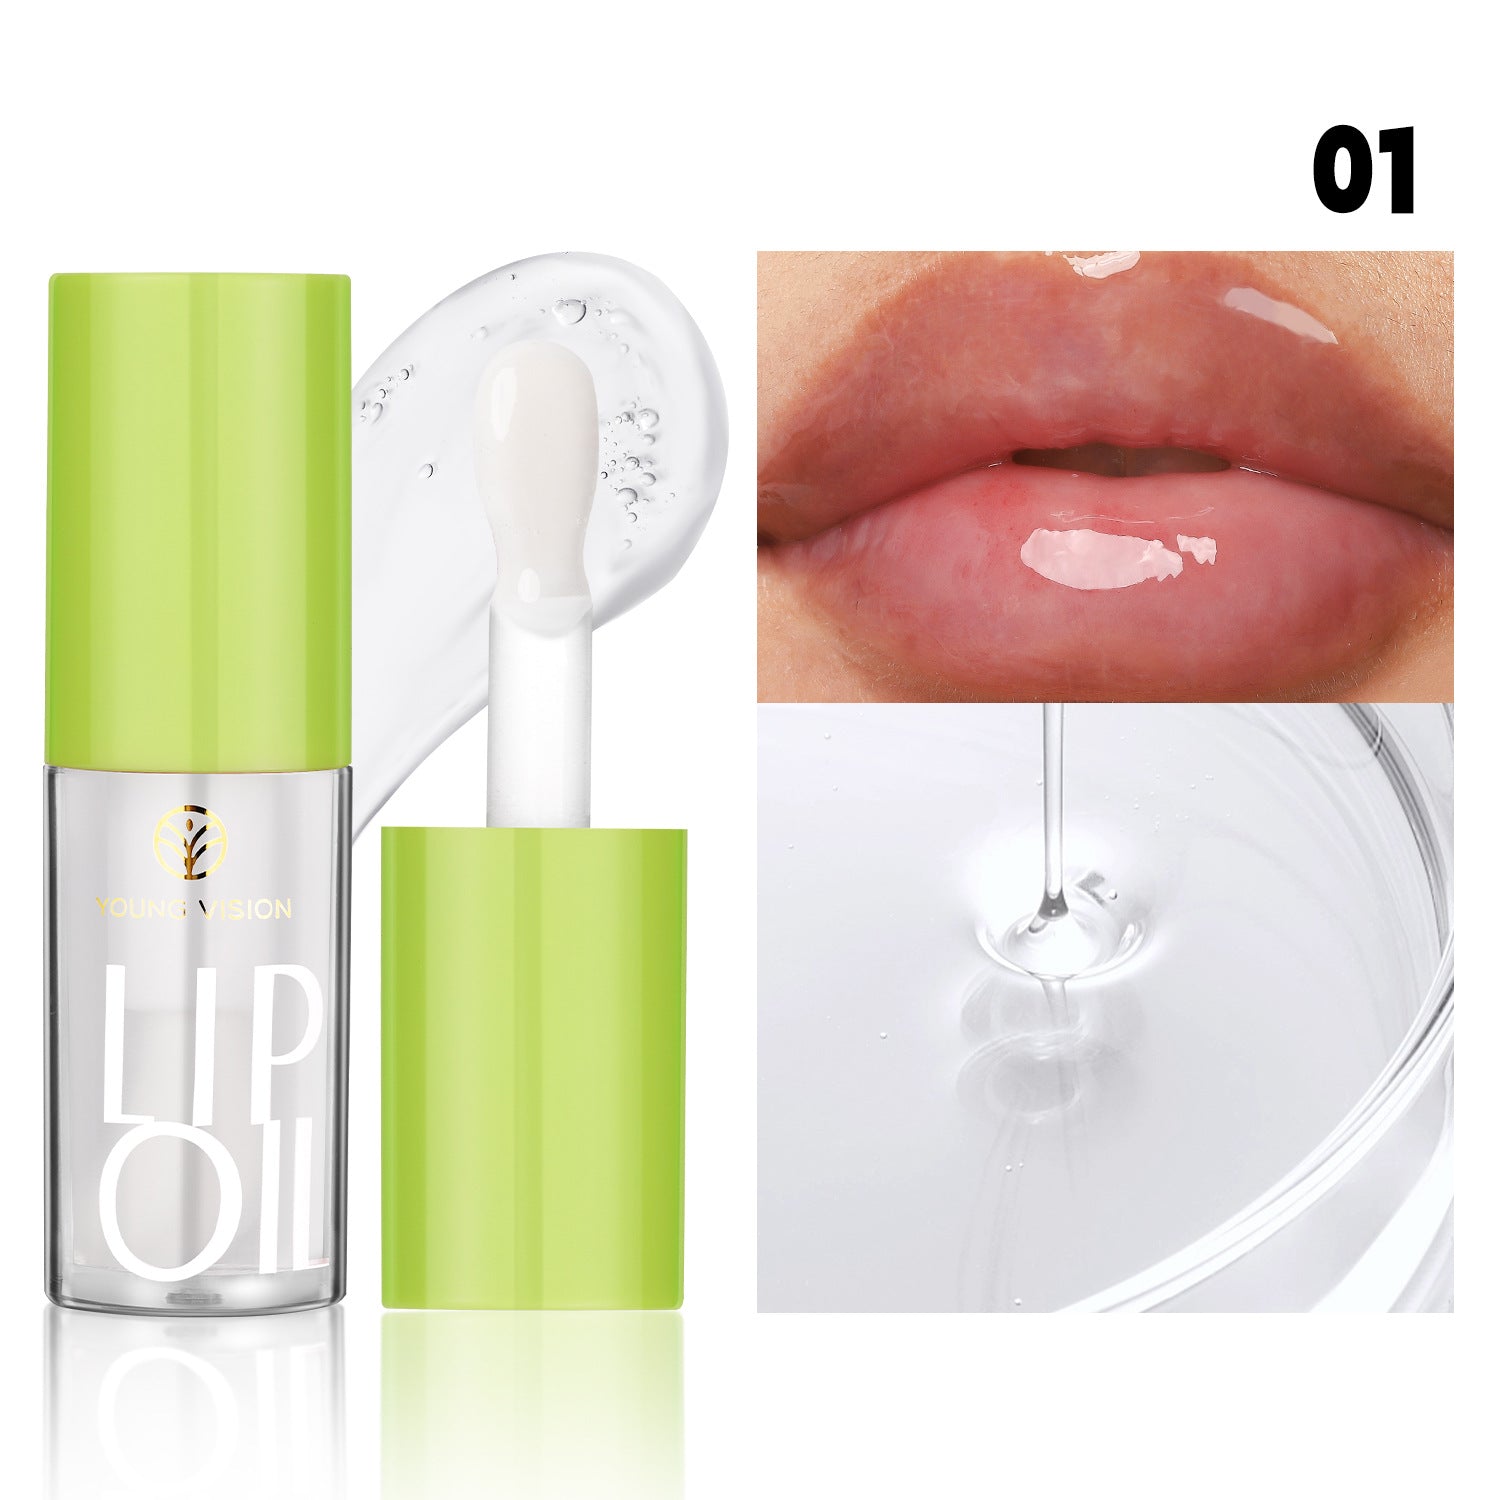 【BeautyGlow FlashSale】For lips items,Free shipping on lip products over 35